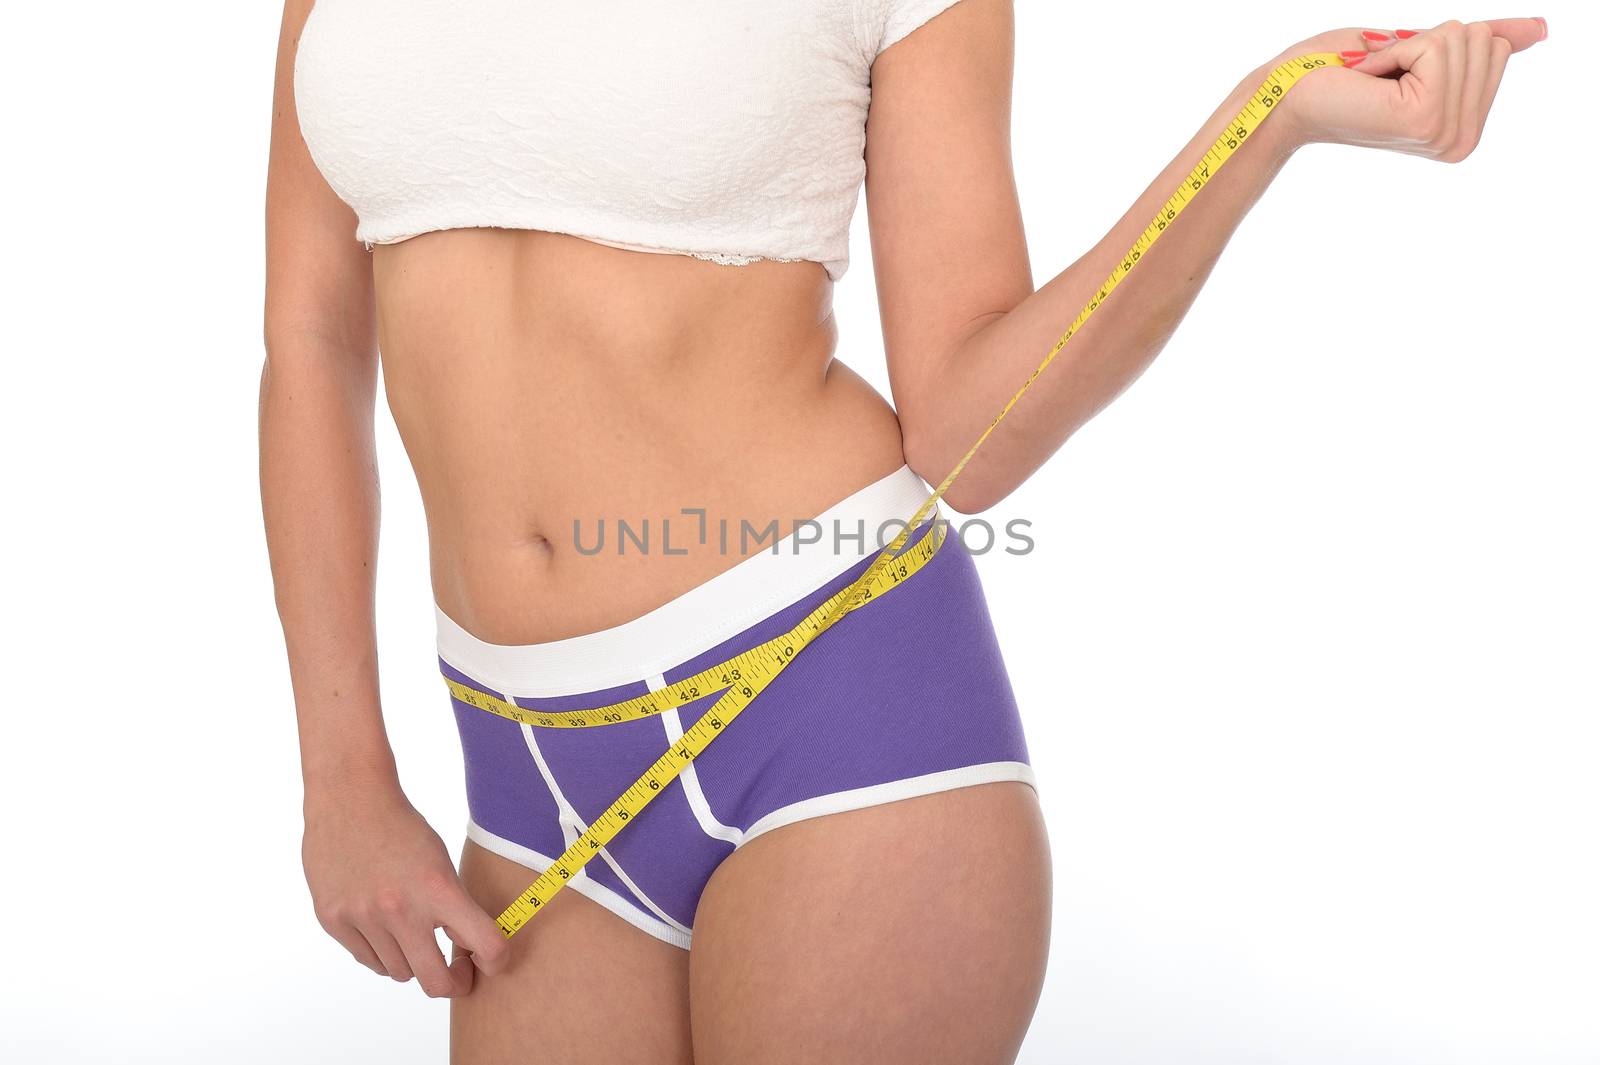 Healthy Young Woman Checking Her Weight Loss With a Tape Measure by Whiteboxmedia